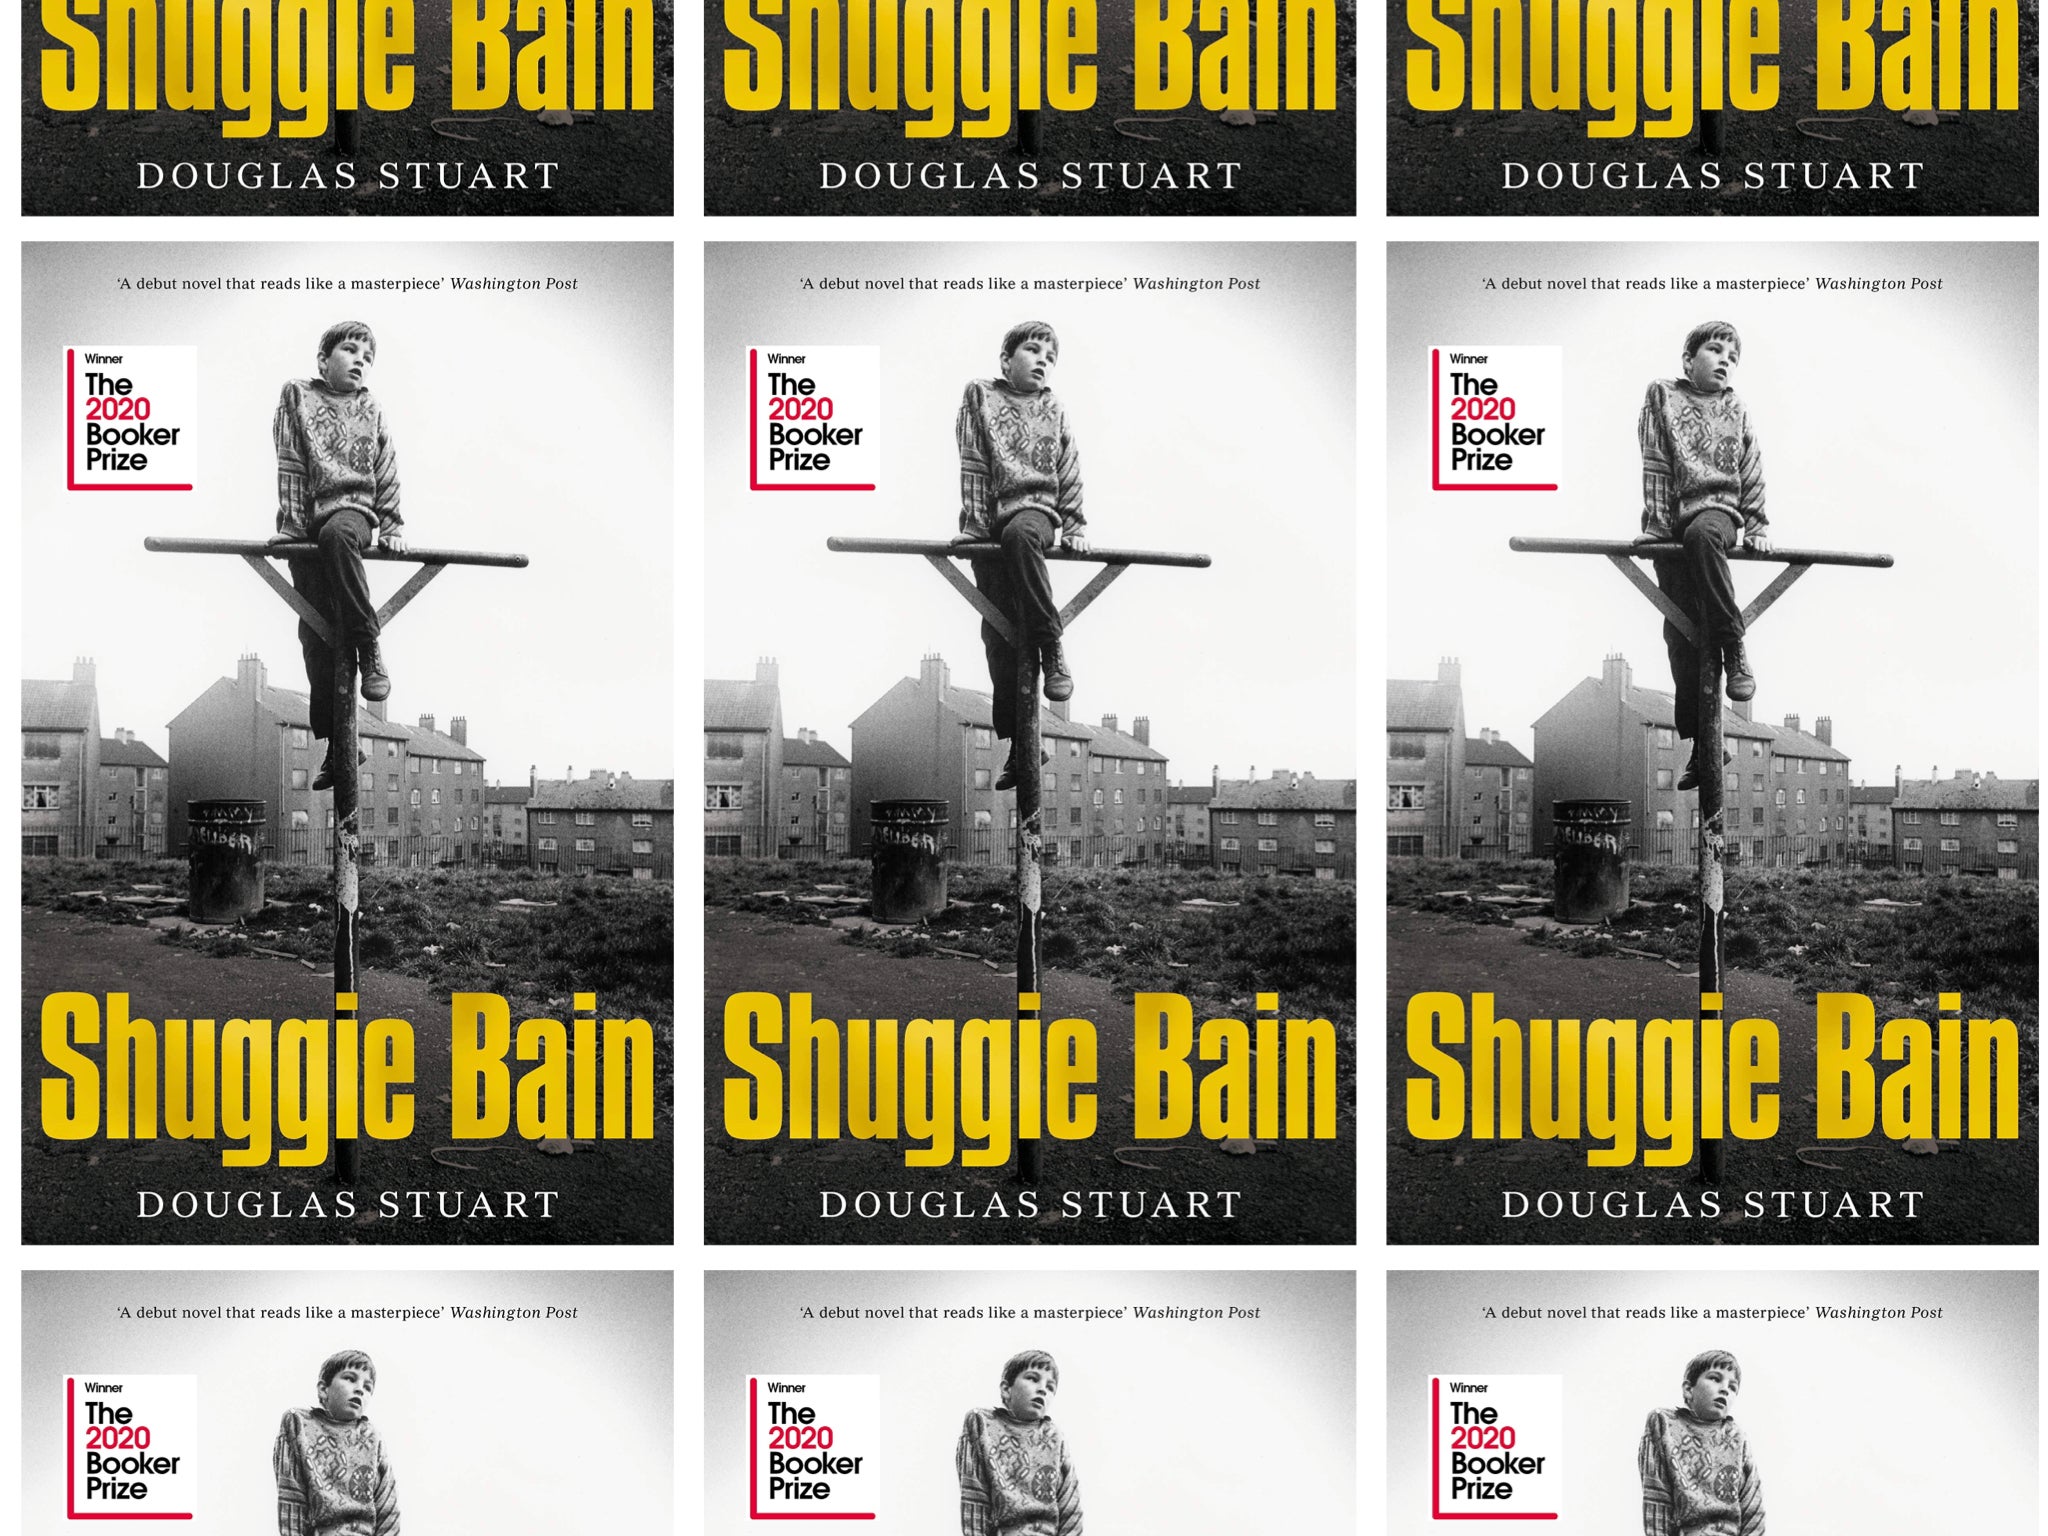 ‘Shuggie Bain’ has sold more than 1.5 million copies worldwide since 2020